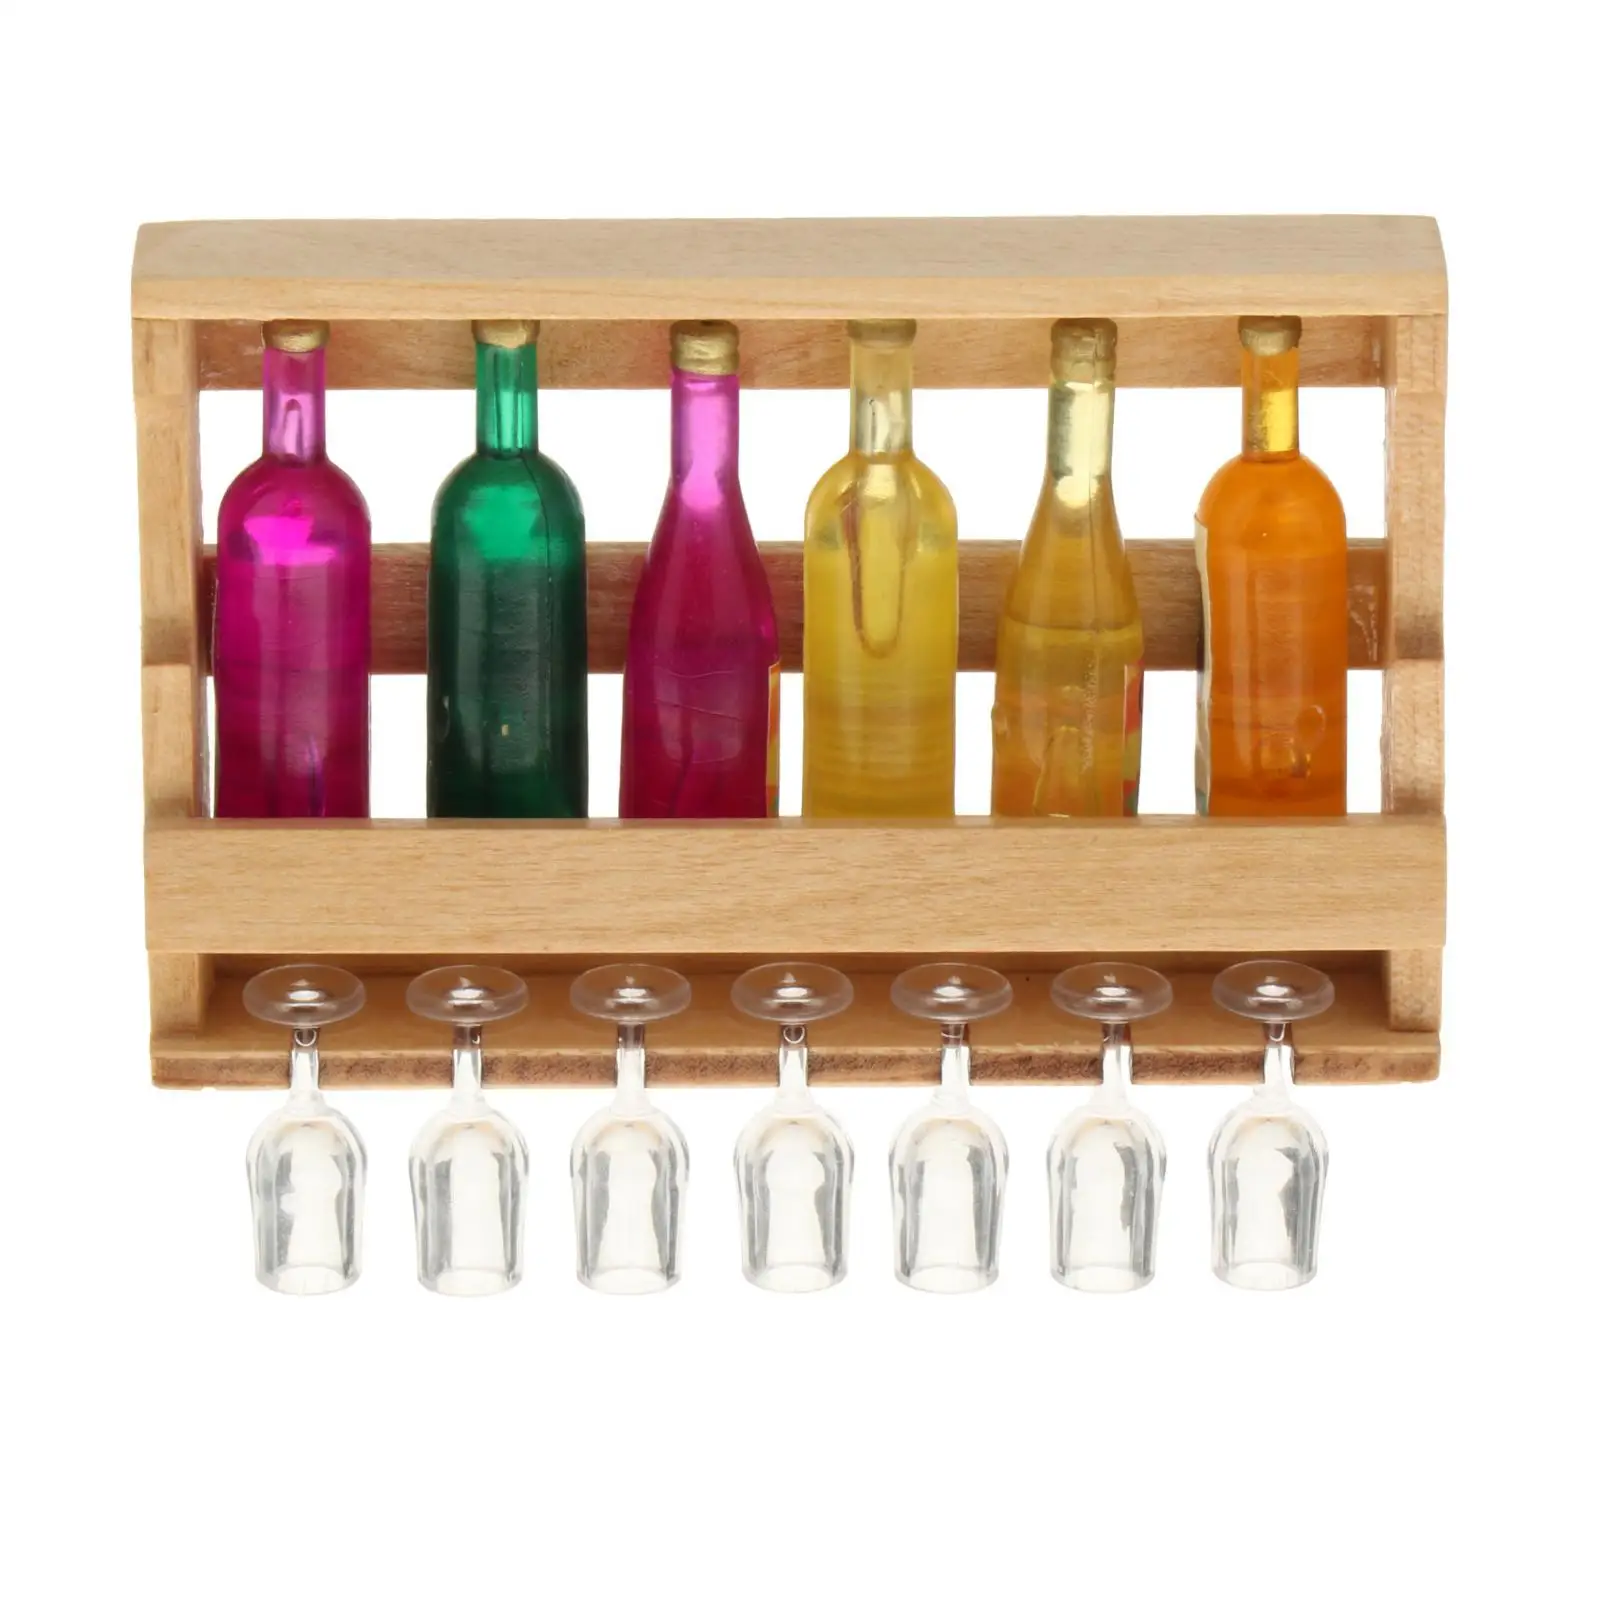 

14x 1:12 Dollhouse Miniature Wine Rack with Bottles and Glass Cup for Bar